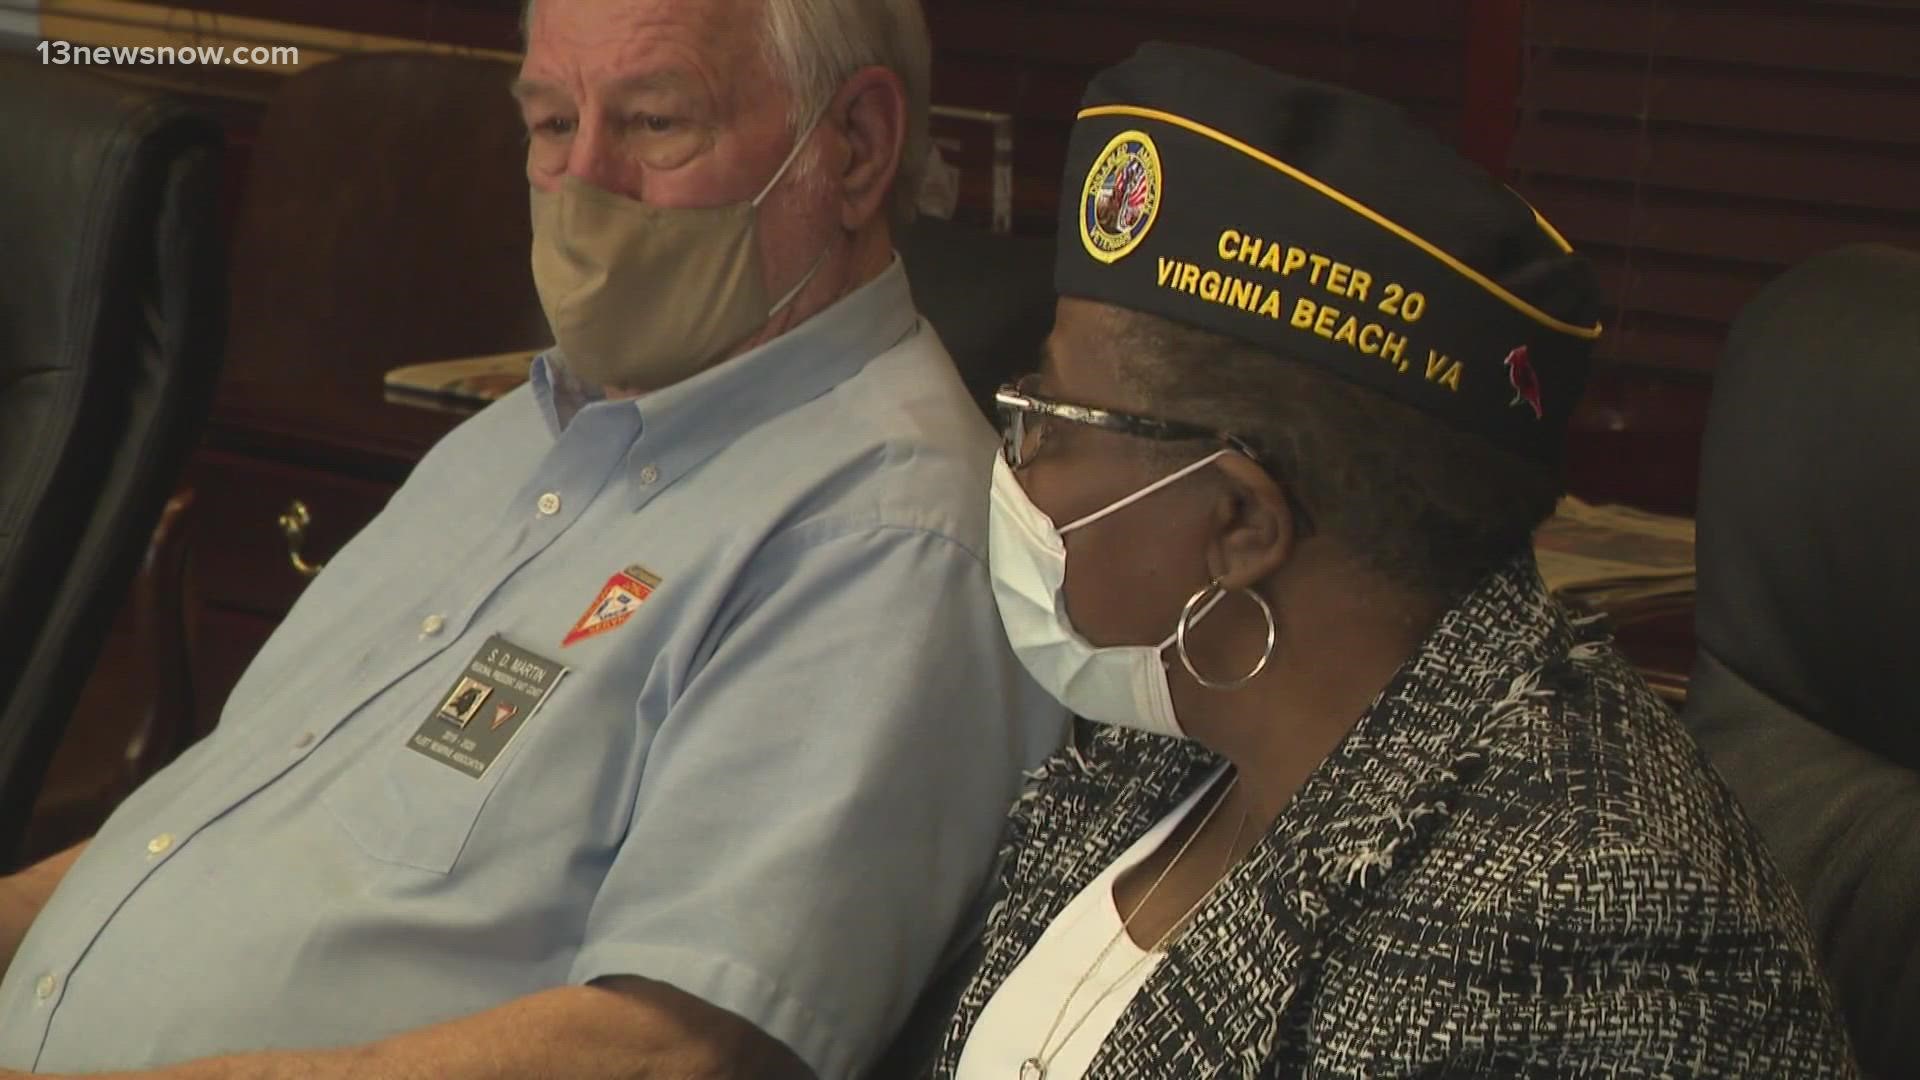 The 2nd-District Congresswoman hosted a roundtable discussion in Virginia Beach on ways to support veterans.